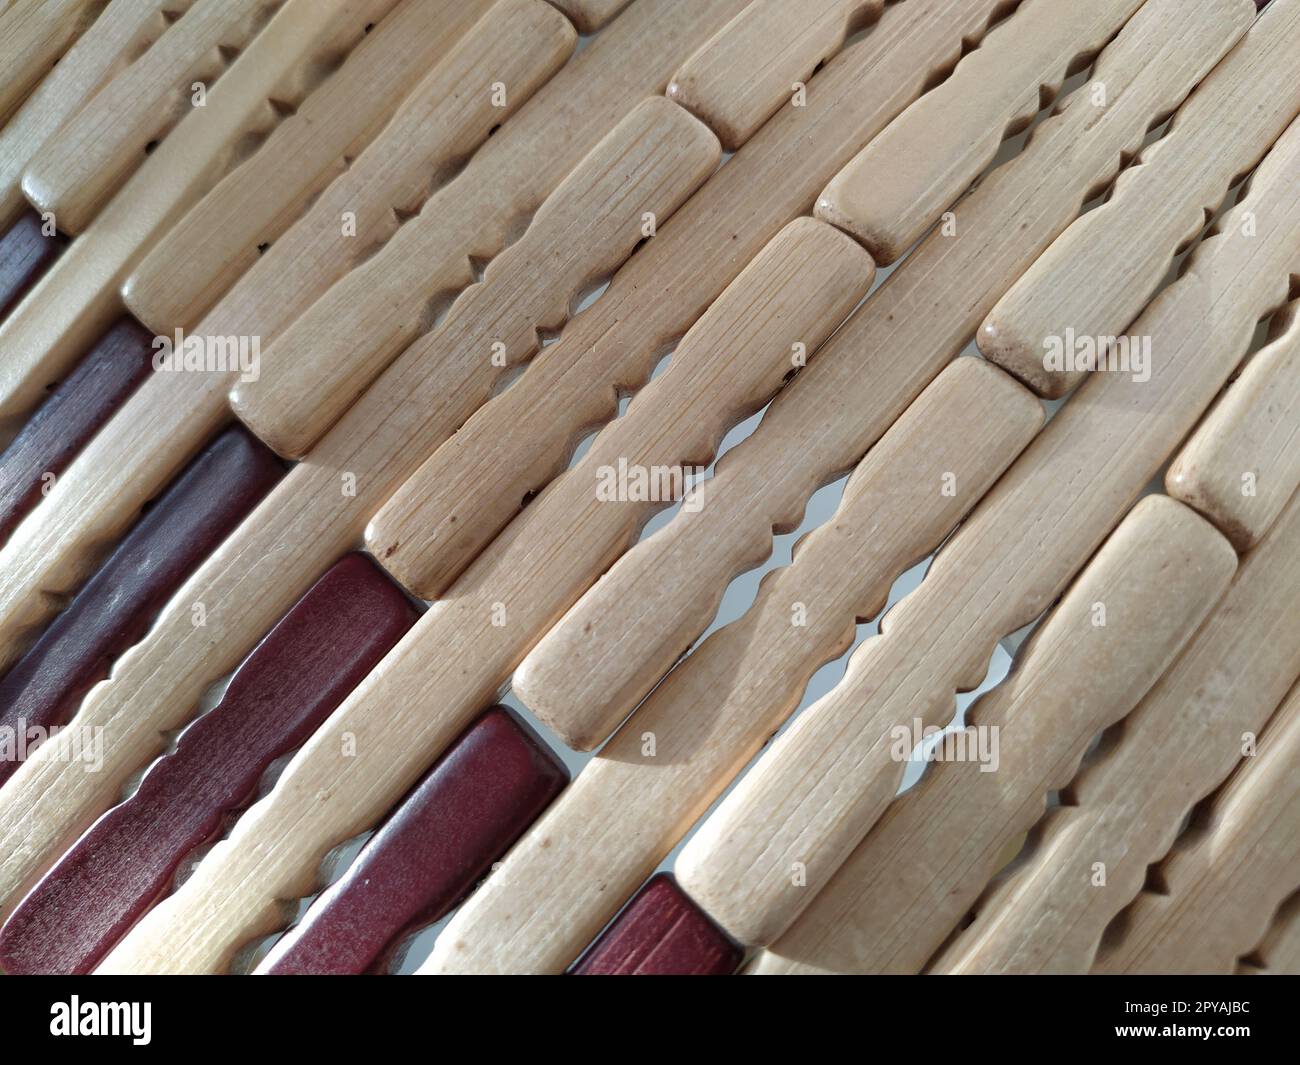 reed or wood mat. The rug is a mat under the hot. Knitted processed wood sticks with rounded edges. Close-up. Yellow, brown and beige colors. Side lighting. Traditional bamboo pad texture Stock Photo